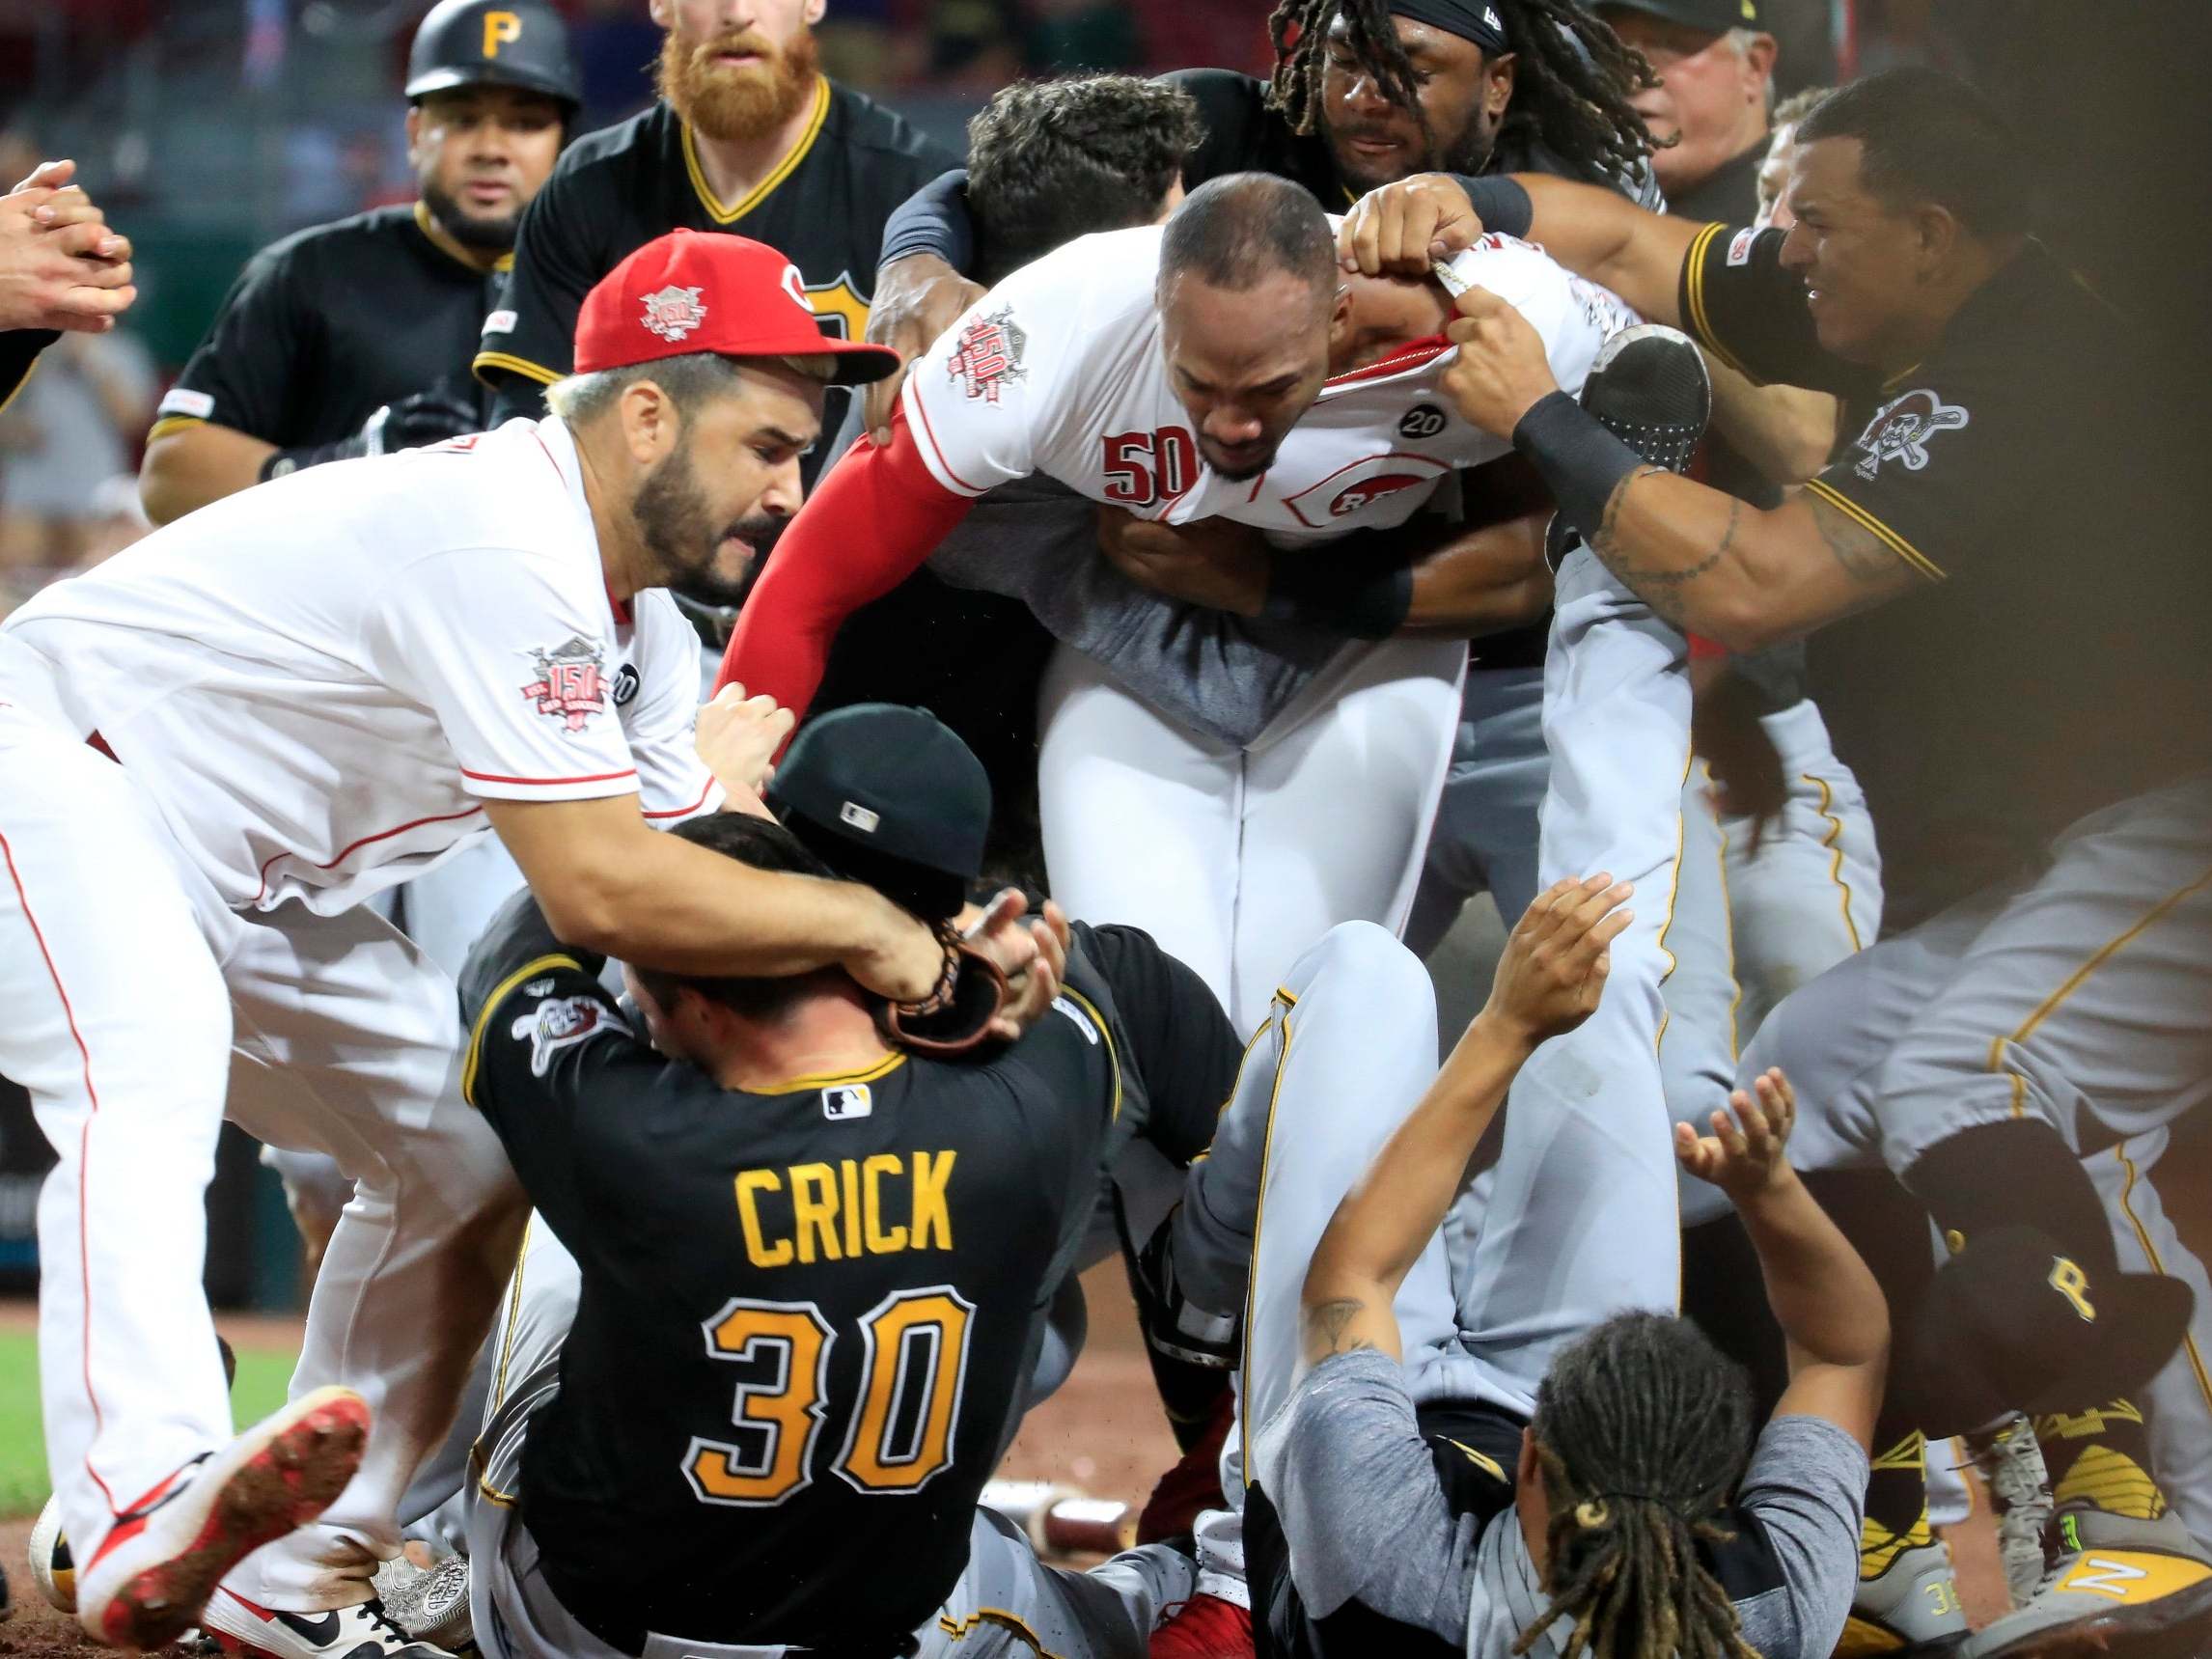 The brawl spills over (Getty)